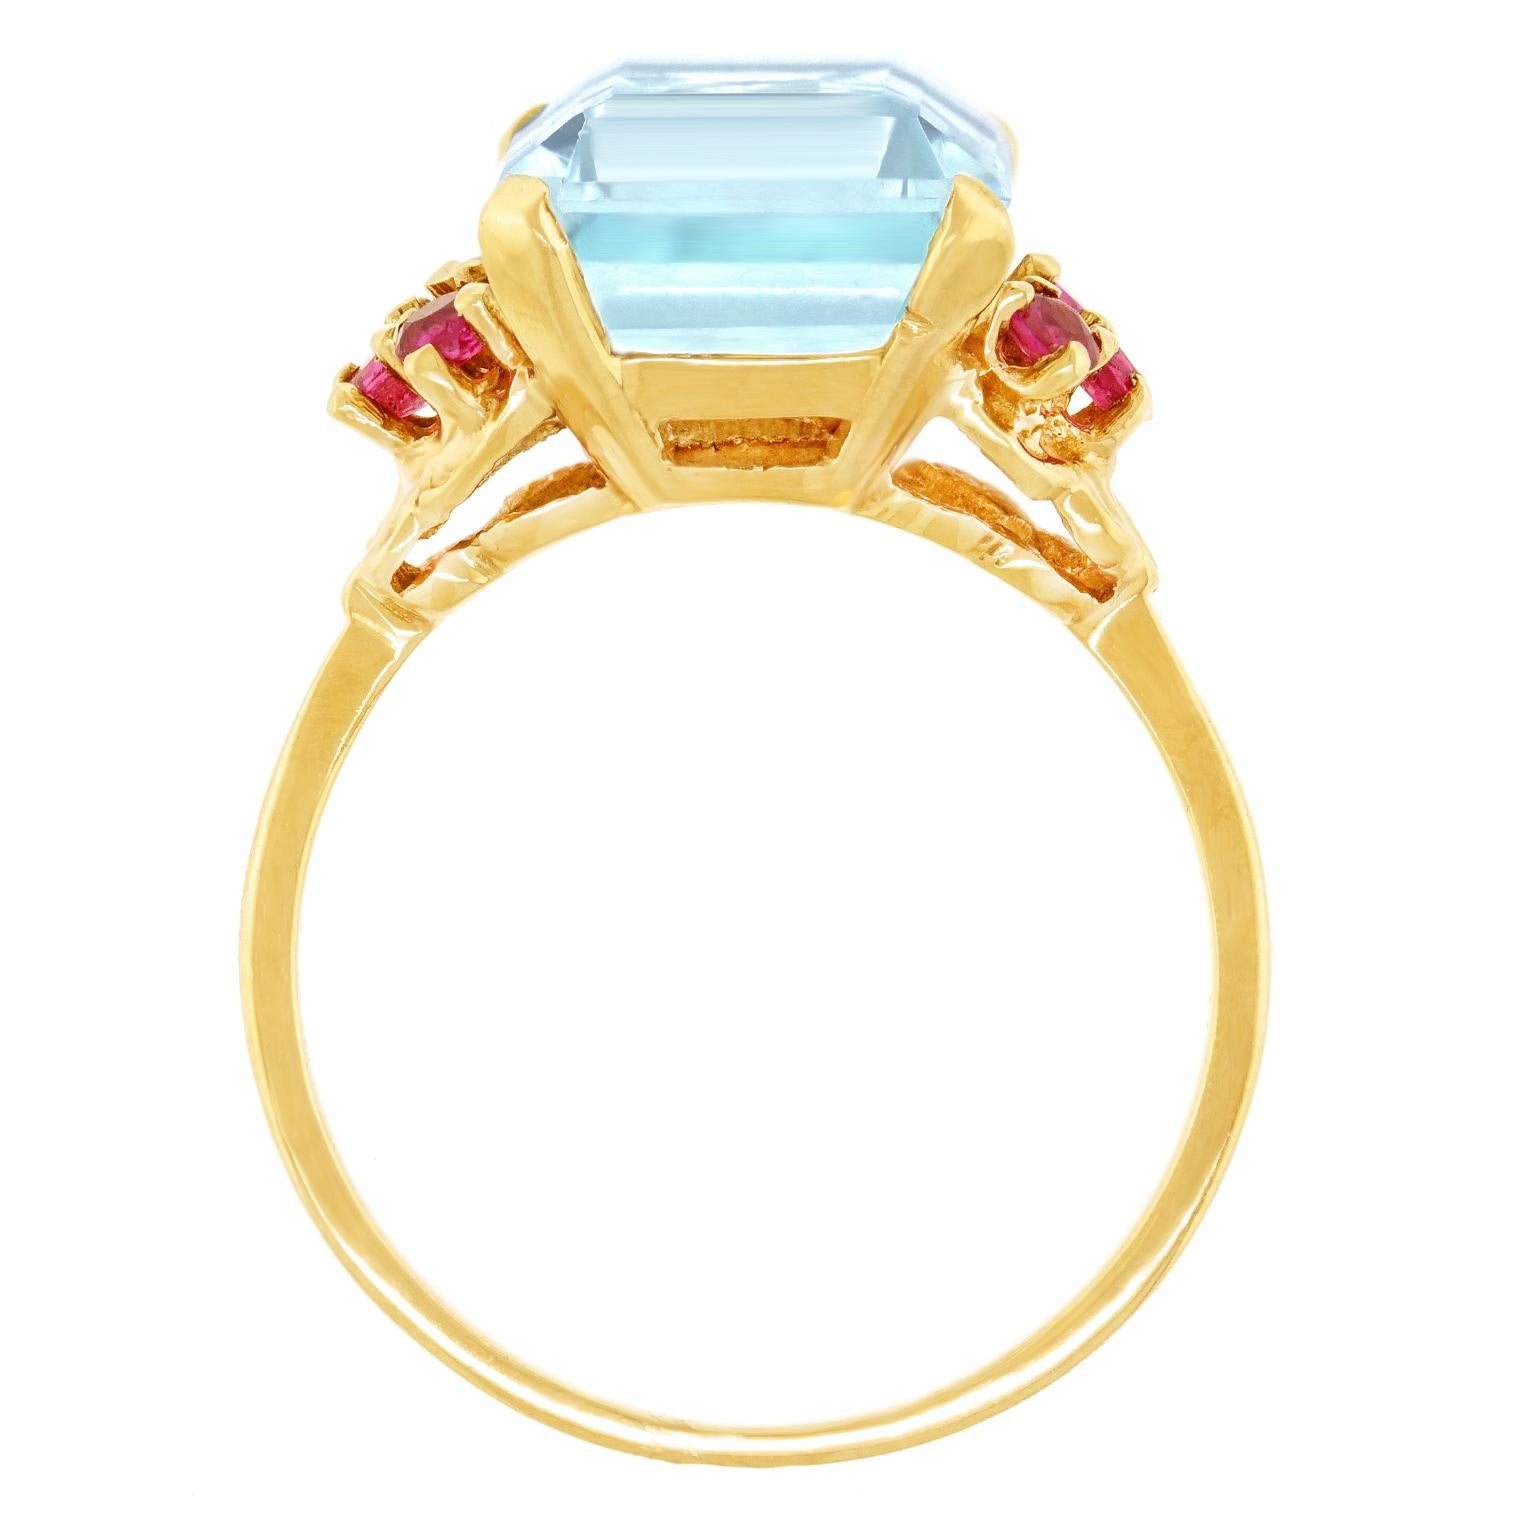 Women's or Men's Retro Fifties Aquamarine and Ruby-Set Gold Ring